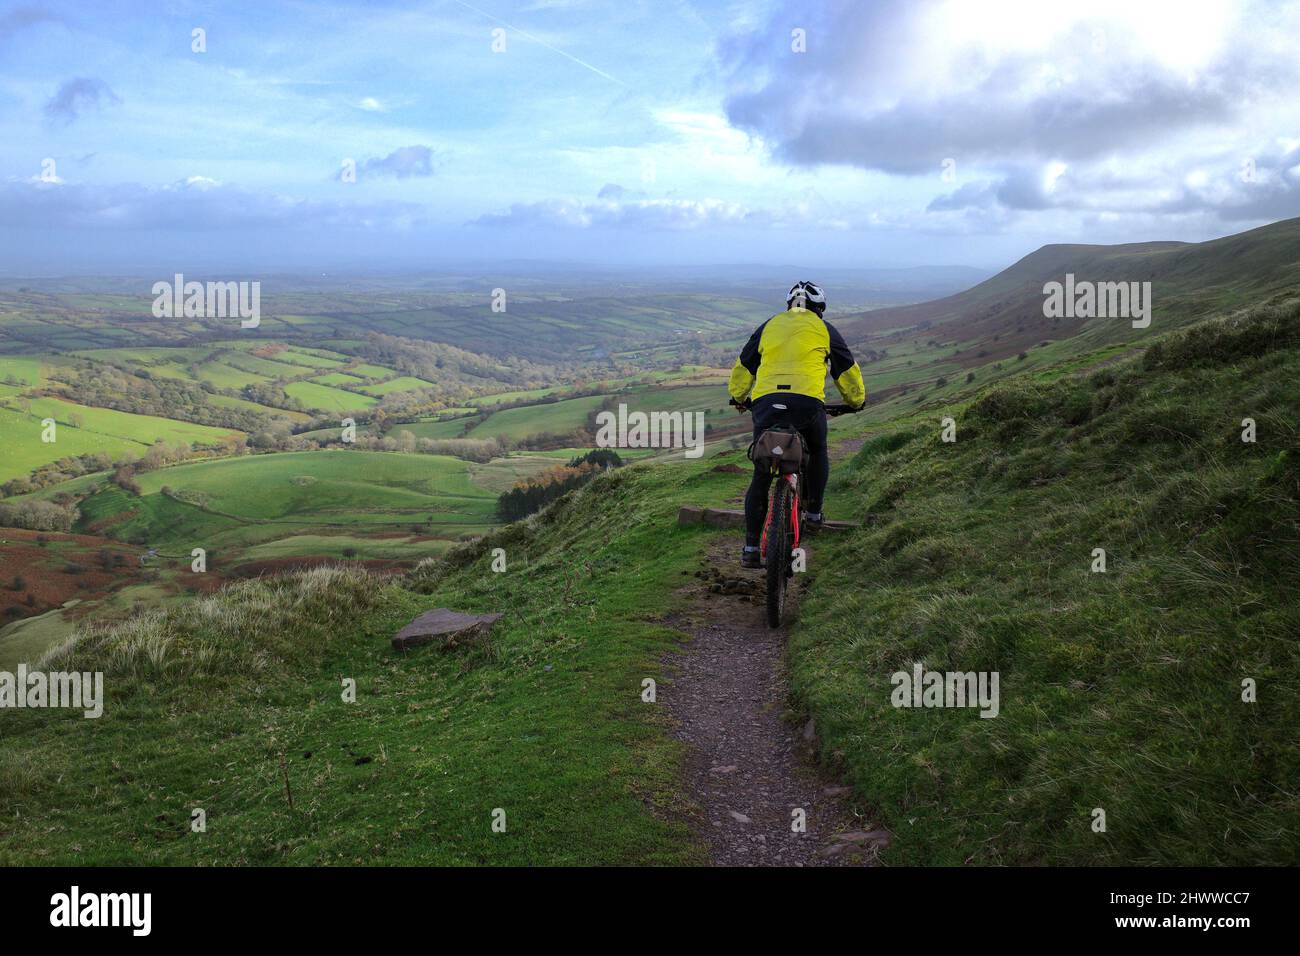 A mountain biker begins a lovely descent, near the Offa's Dyke Path, near Hay Bluff, in the Black Mountains, Brecon Beacons National Park, Wales. Stock Photo